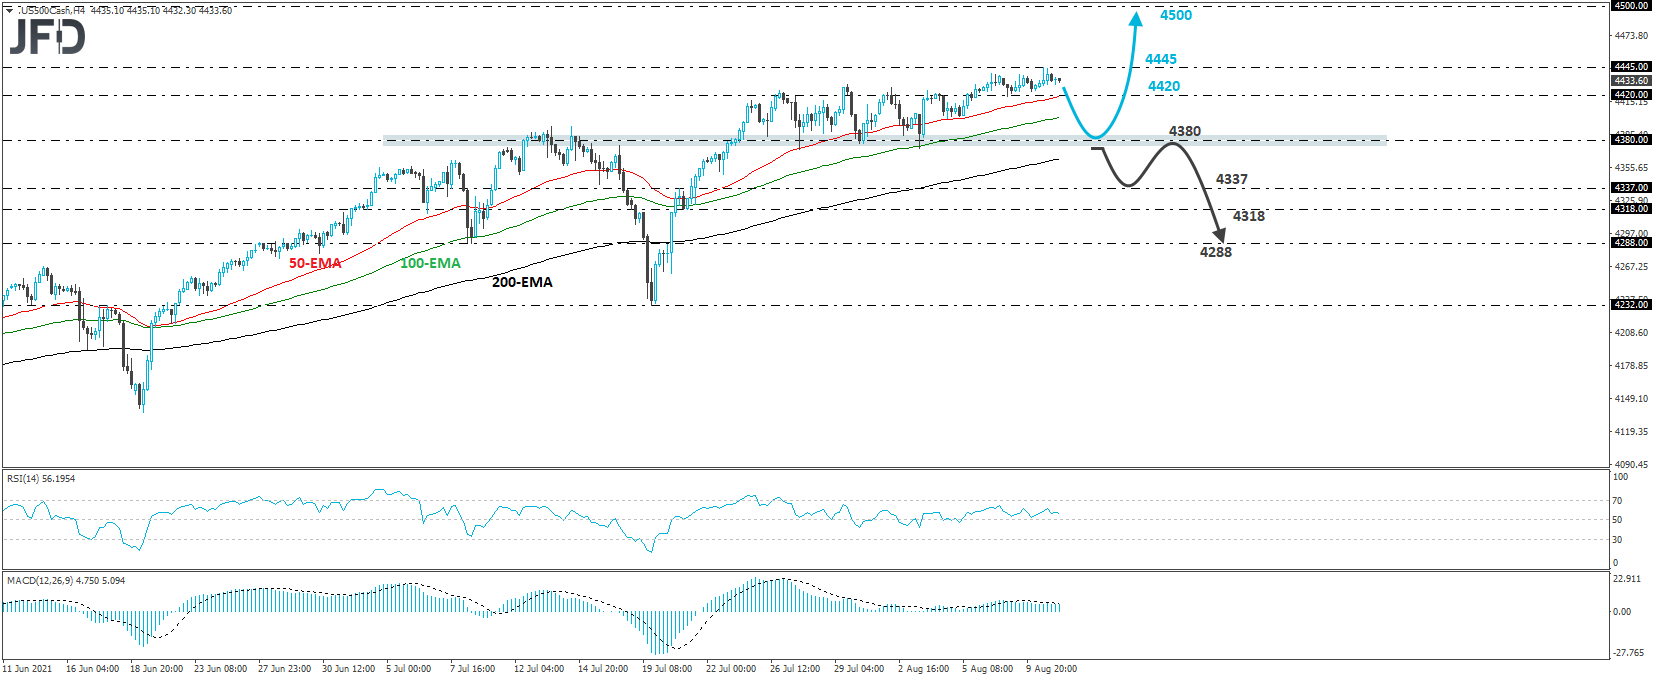 S&P 500 cash index 4-hour chart technical analysis